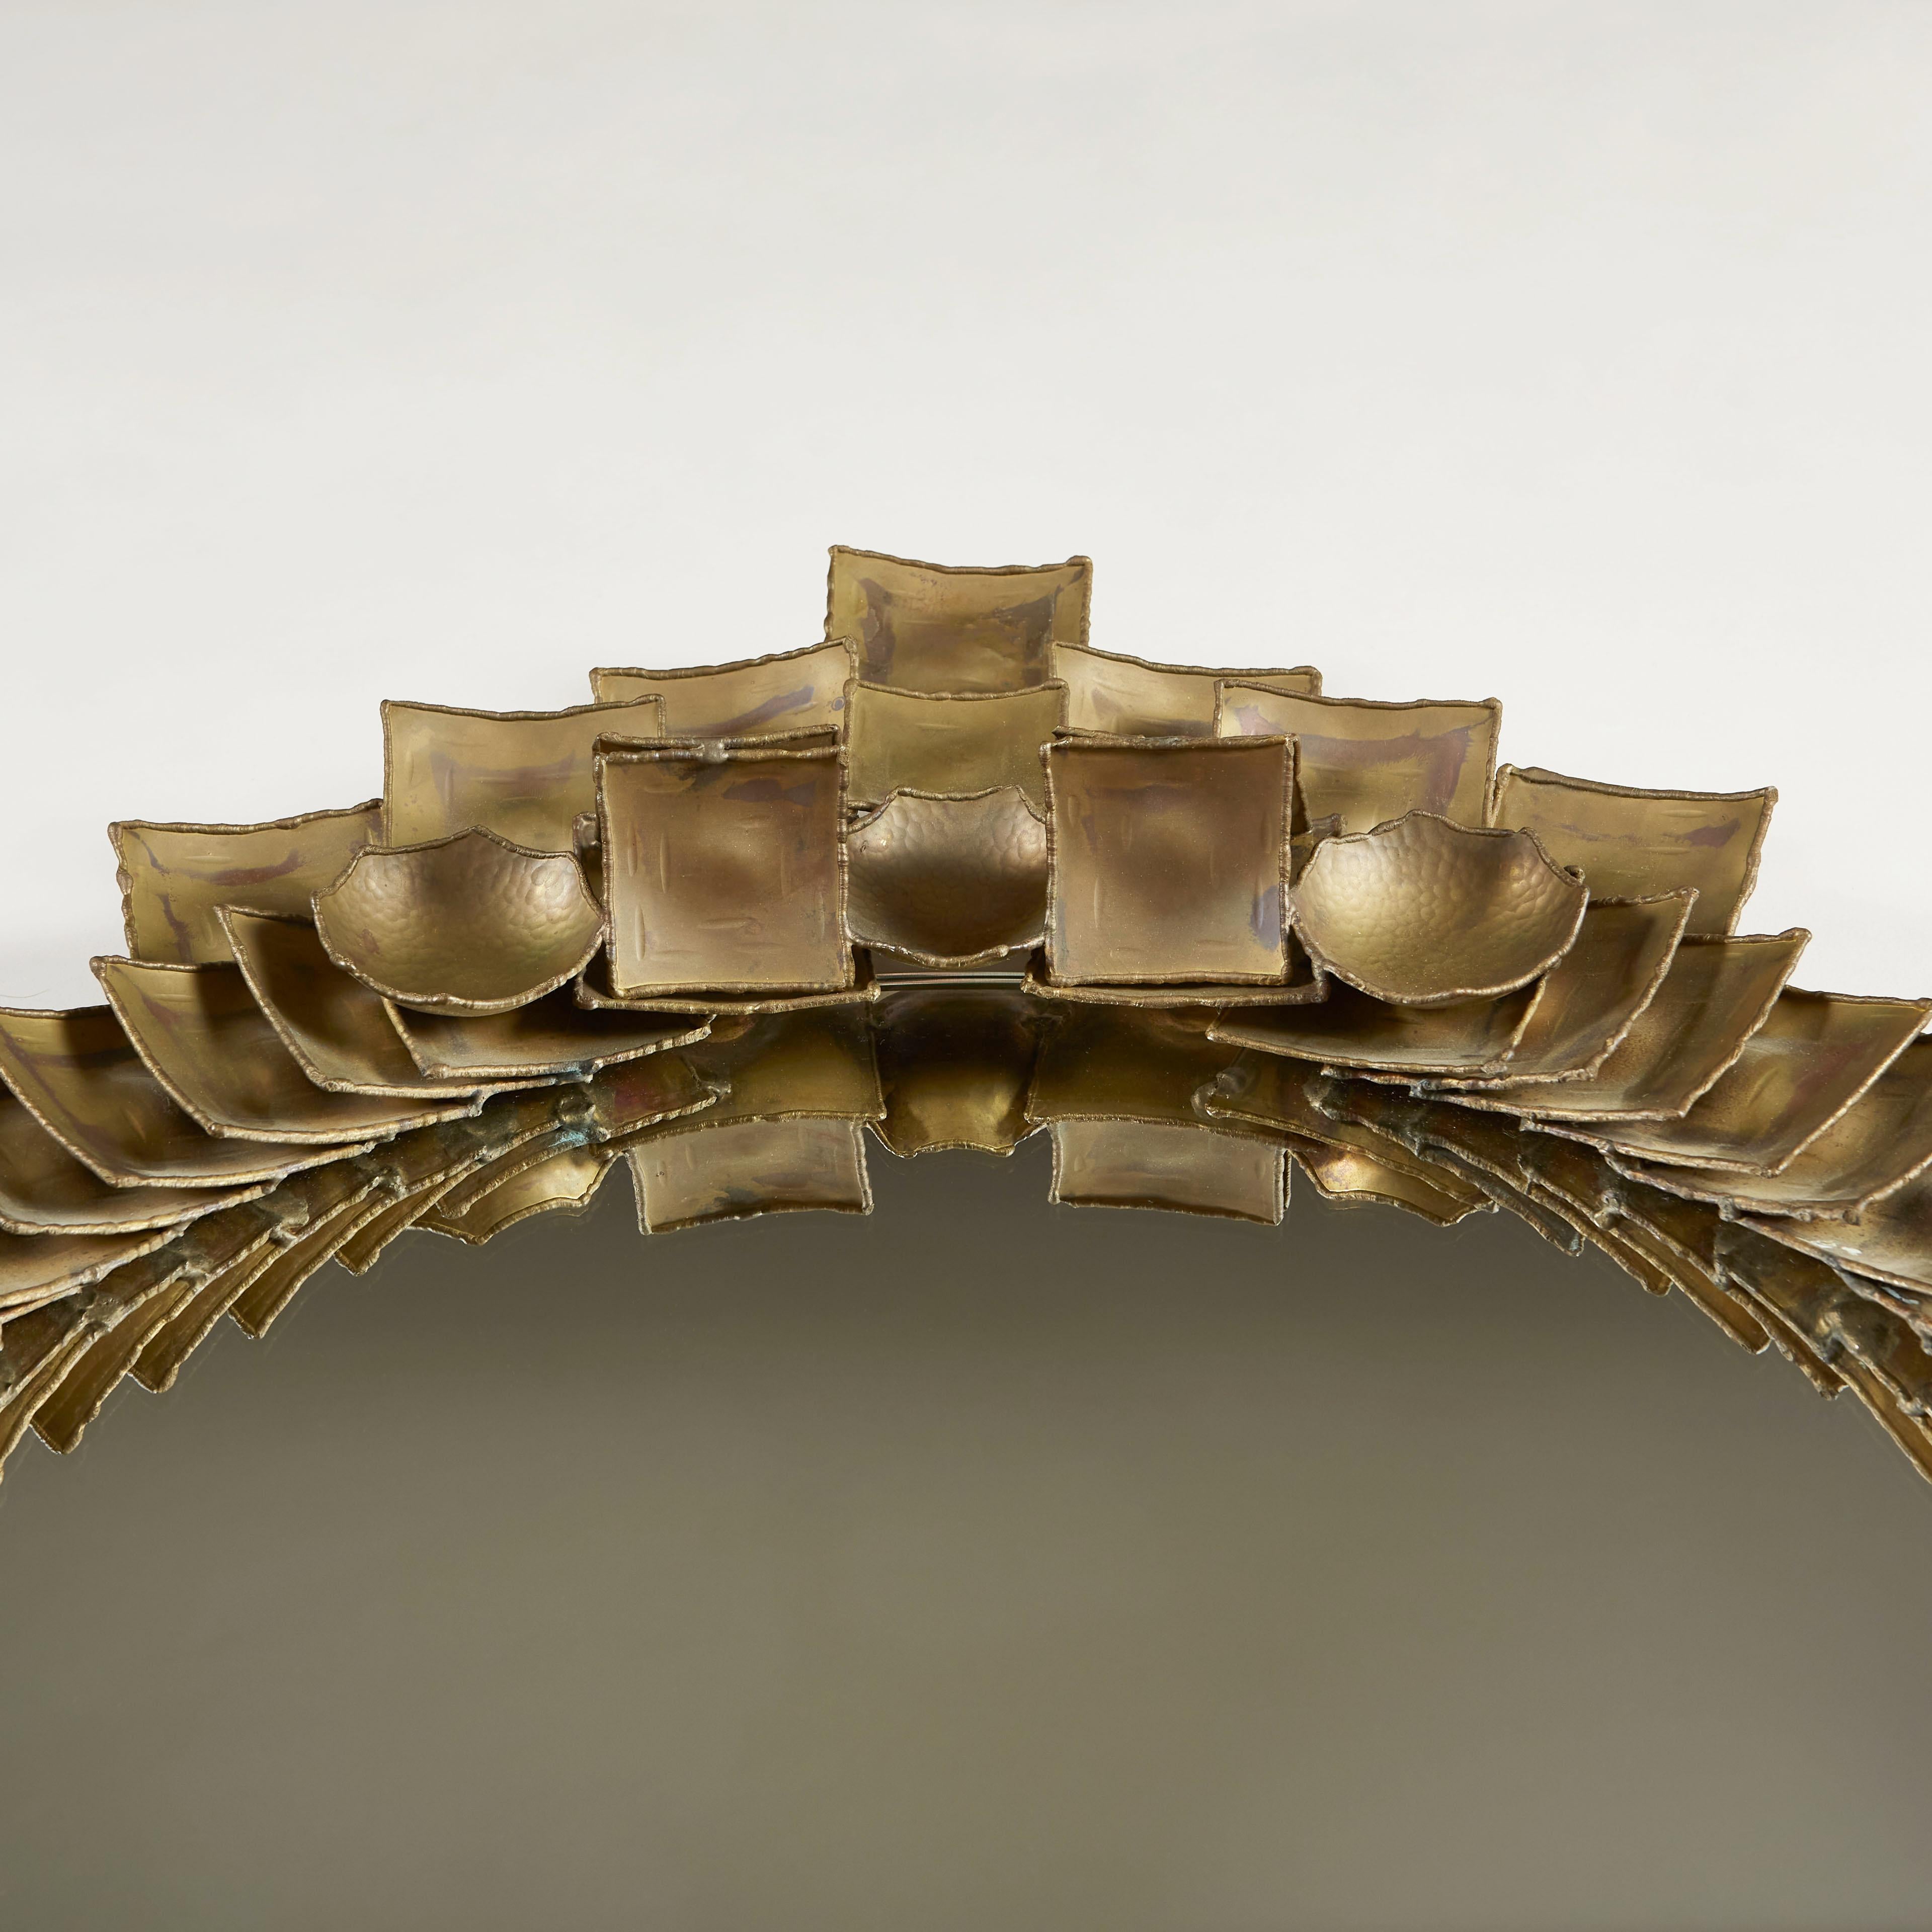 Burnished 1970s Hand-Crafted Sculptural Mirror Designed & Made by Claes Giertta Sweden